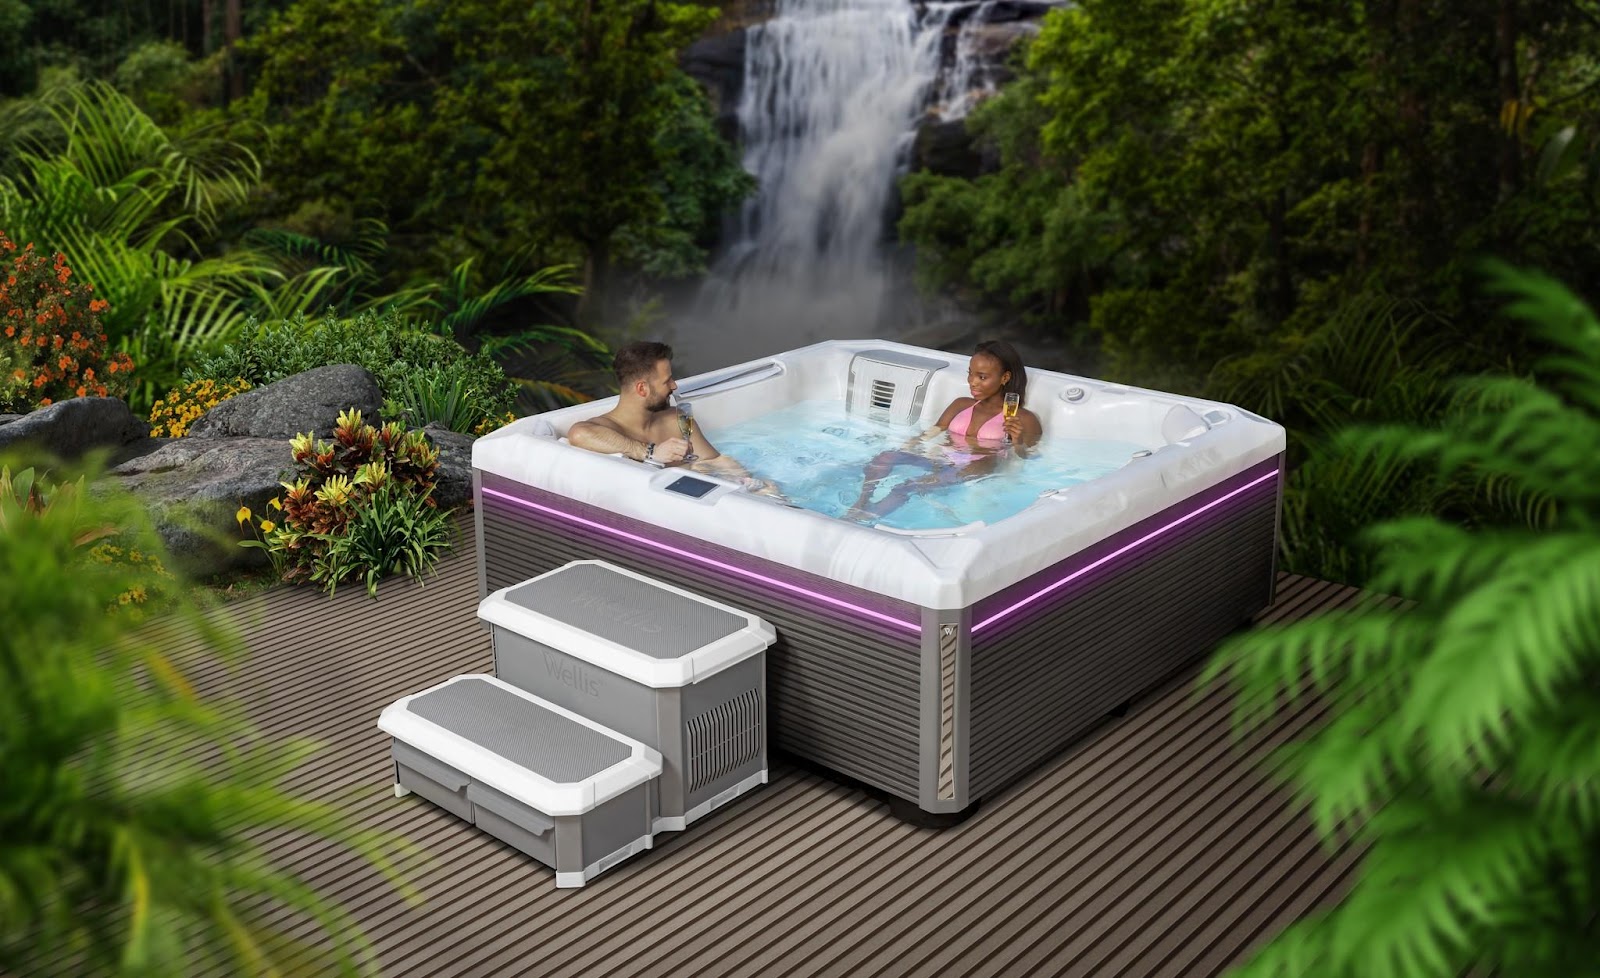 The locally owned outdoor experience improvement store has become the go-to name for residents of the region on the back of its superior quality hot tubs, swim spas, and saunas, along with its exceptional customer service.